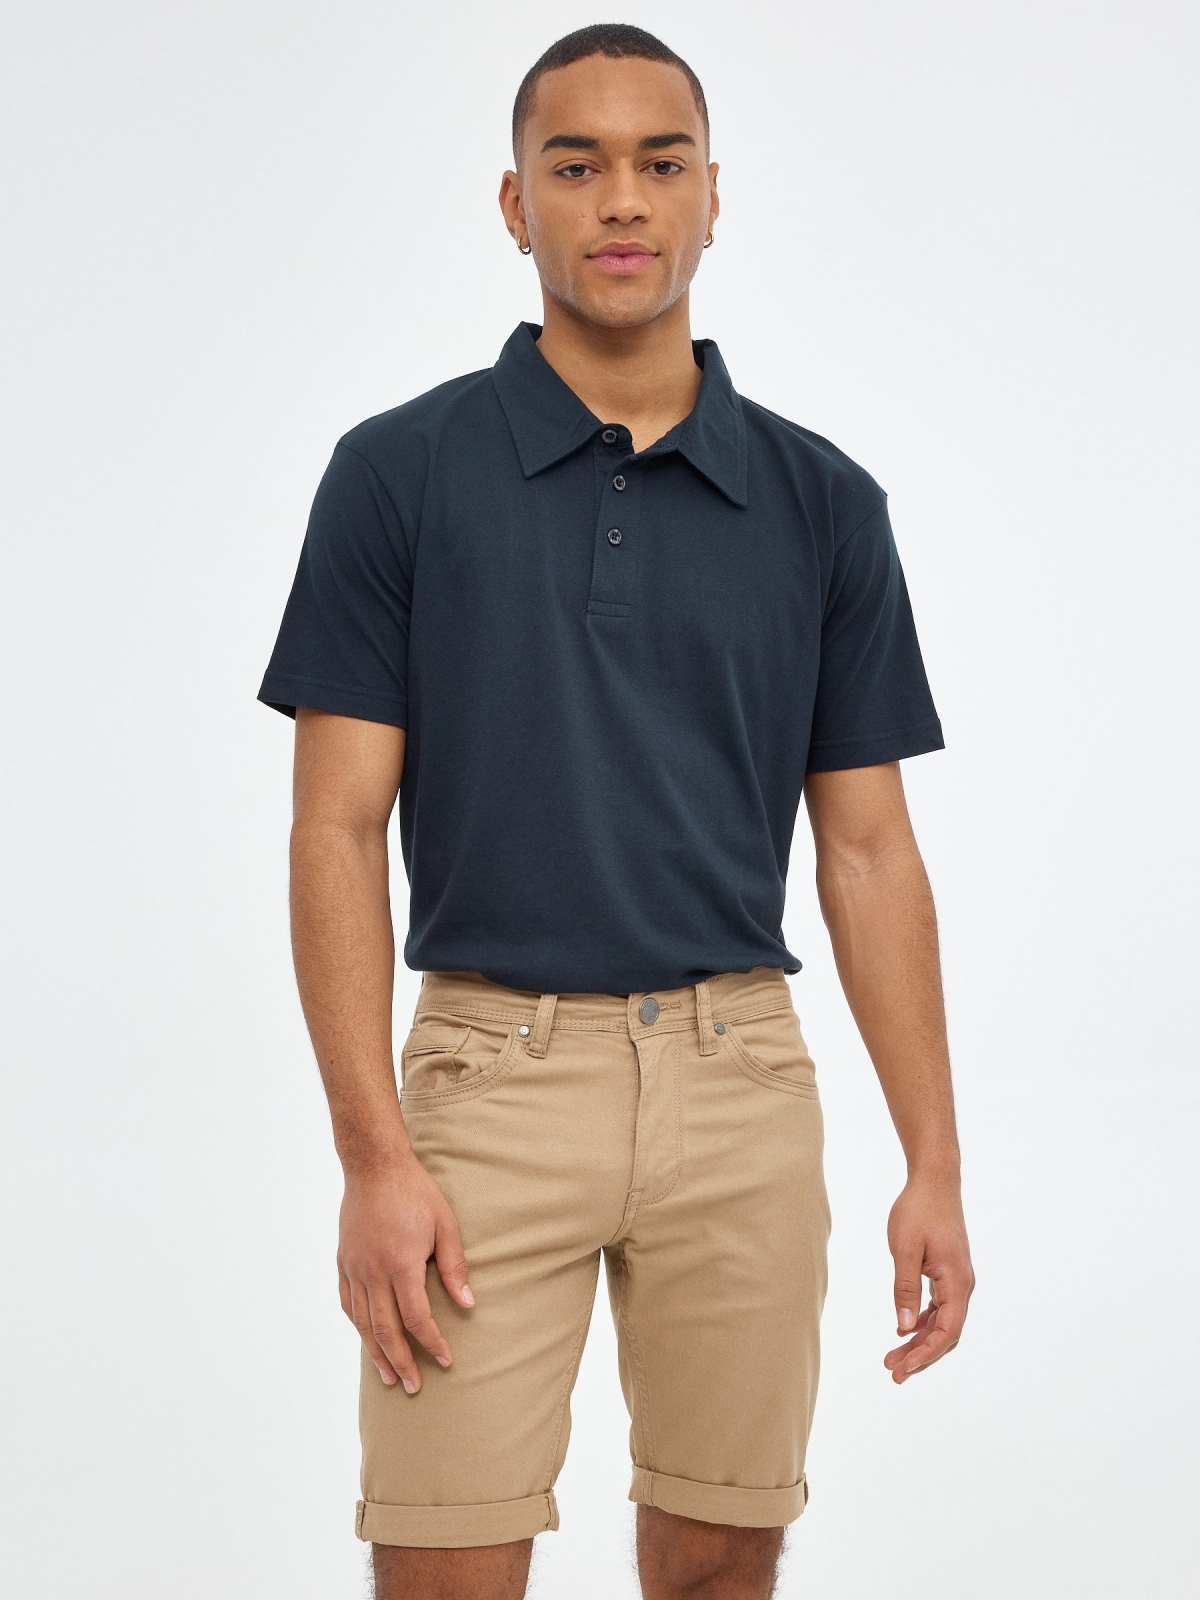 Bermuda short with five pockets beige middle front view